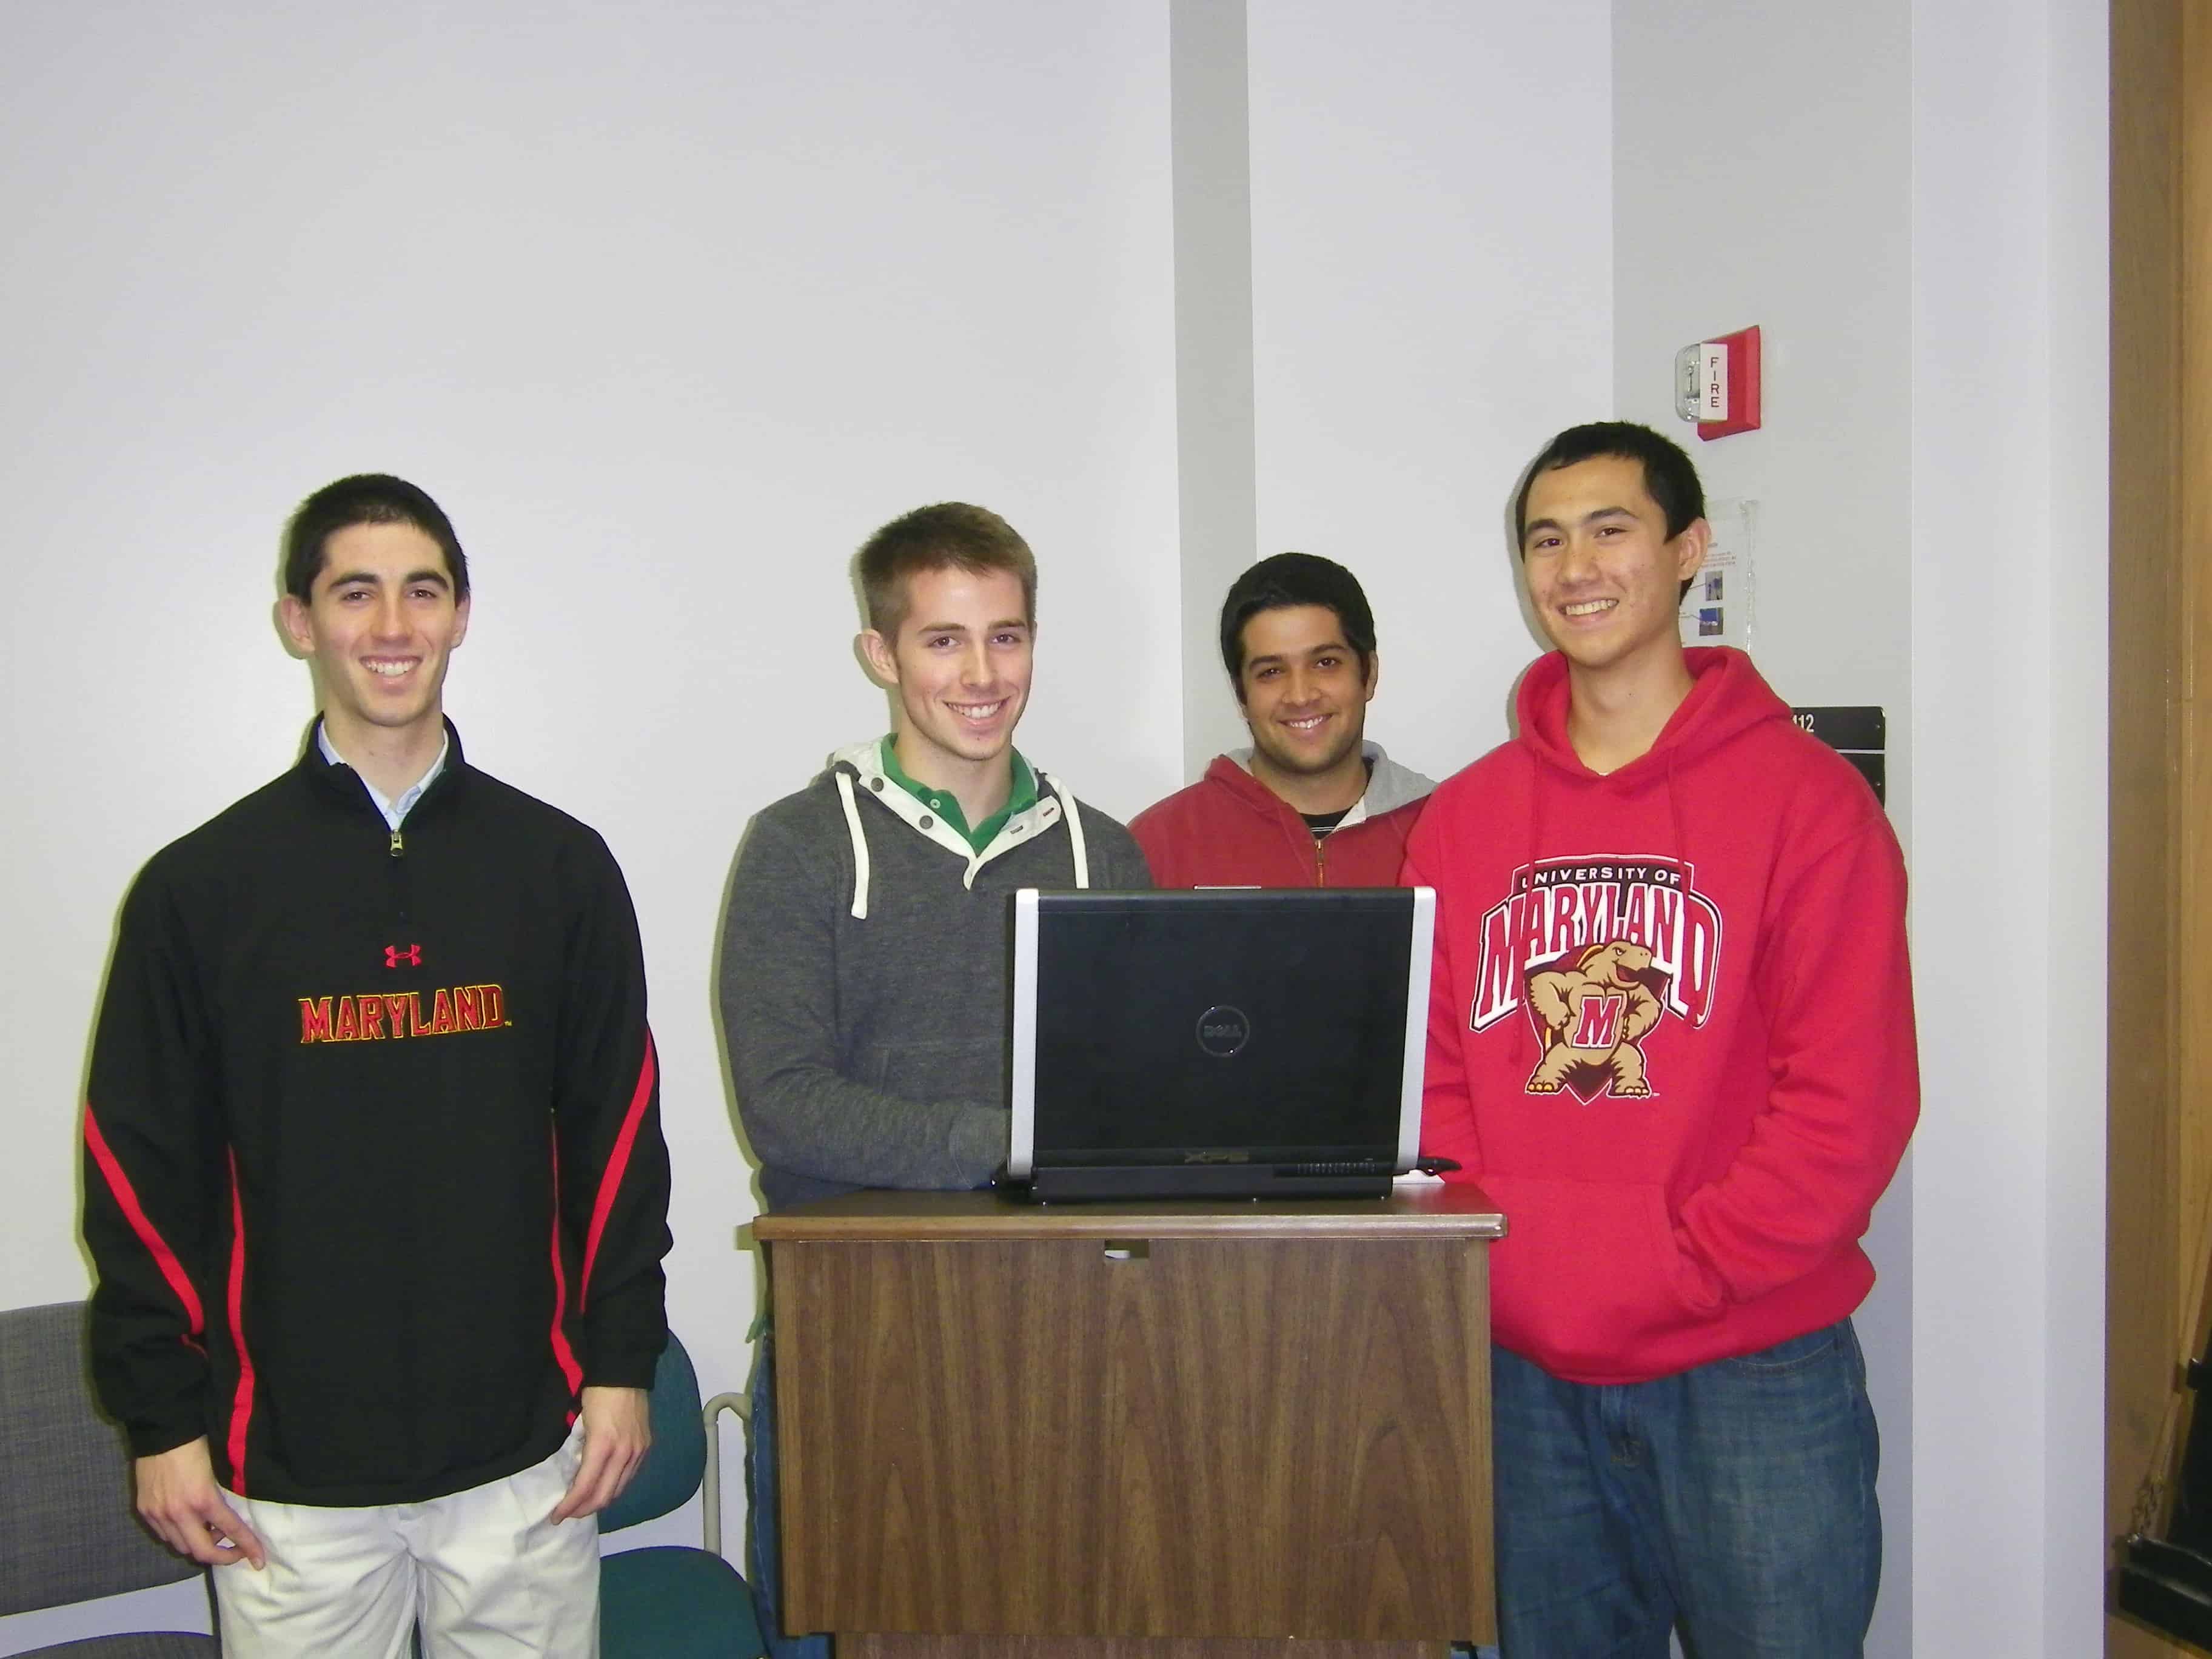 From left to right: Julius Goldberg, Chris Riley, Andrew Garavito and Ryan Wallace.